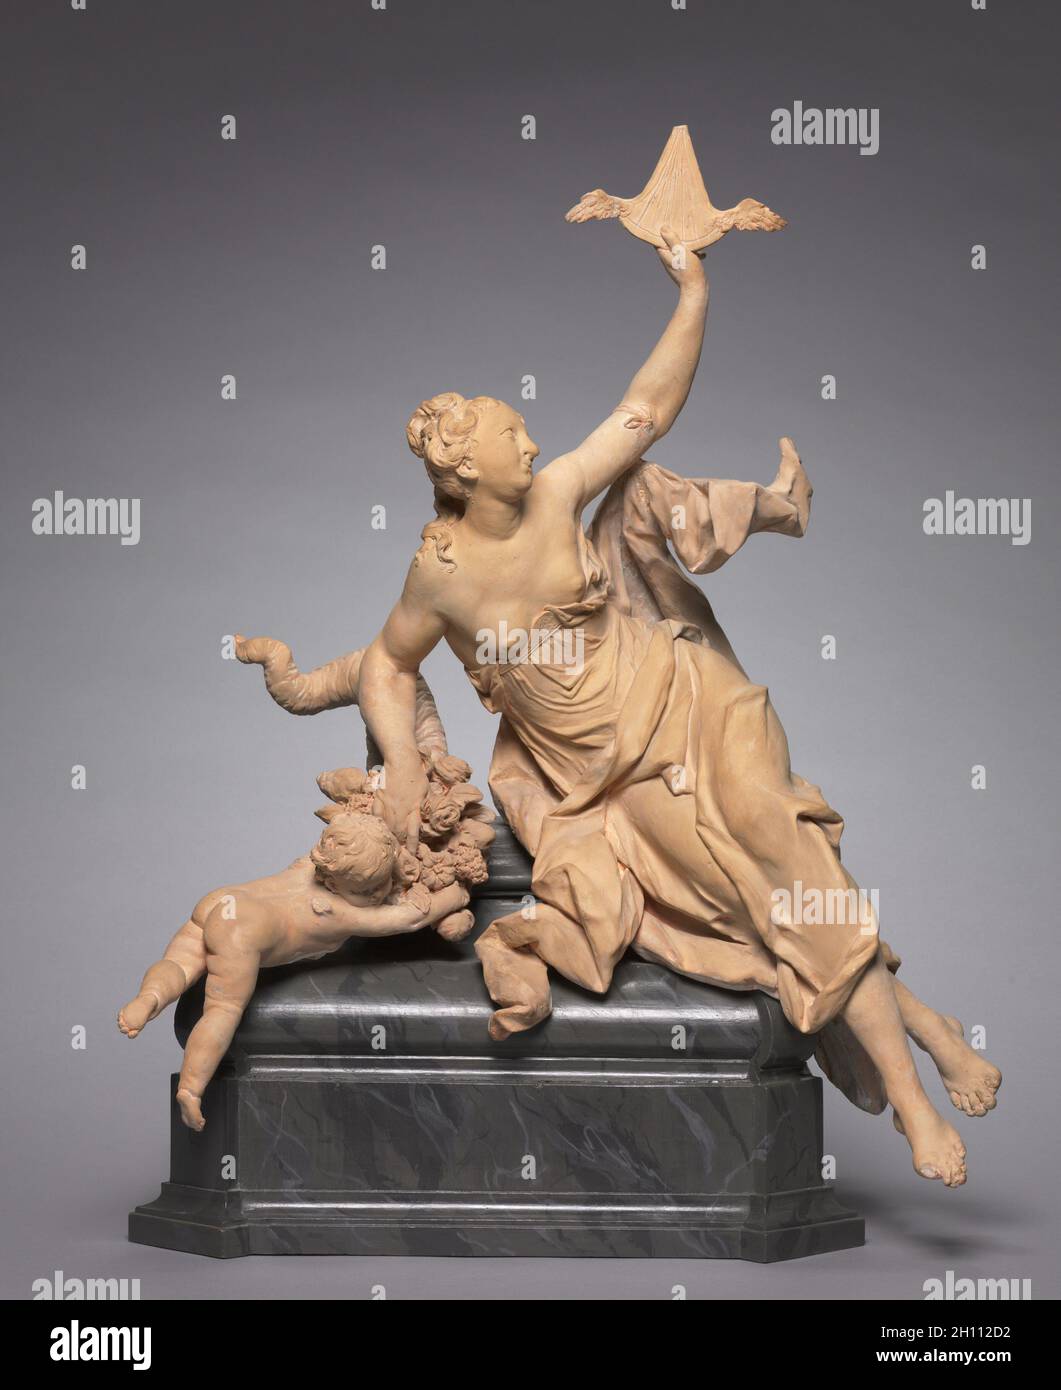 Abundance, c. 1730. Attributed to Lorenzo Matielli (Austrian, c. 1688-1748). Terracotta; overall: 75 x 56.7 x 35.4 cm (29 1/2 x 22 5/16 x 13 15/16 in.); without base: 69.3 cm (27 5/16 in.). Stock Photo